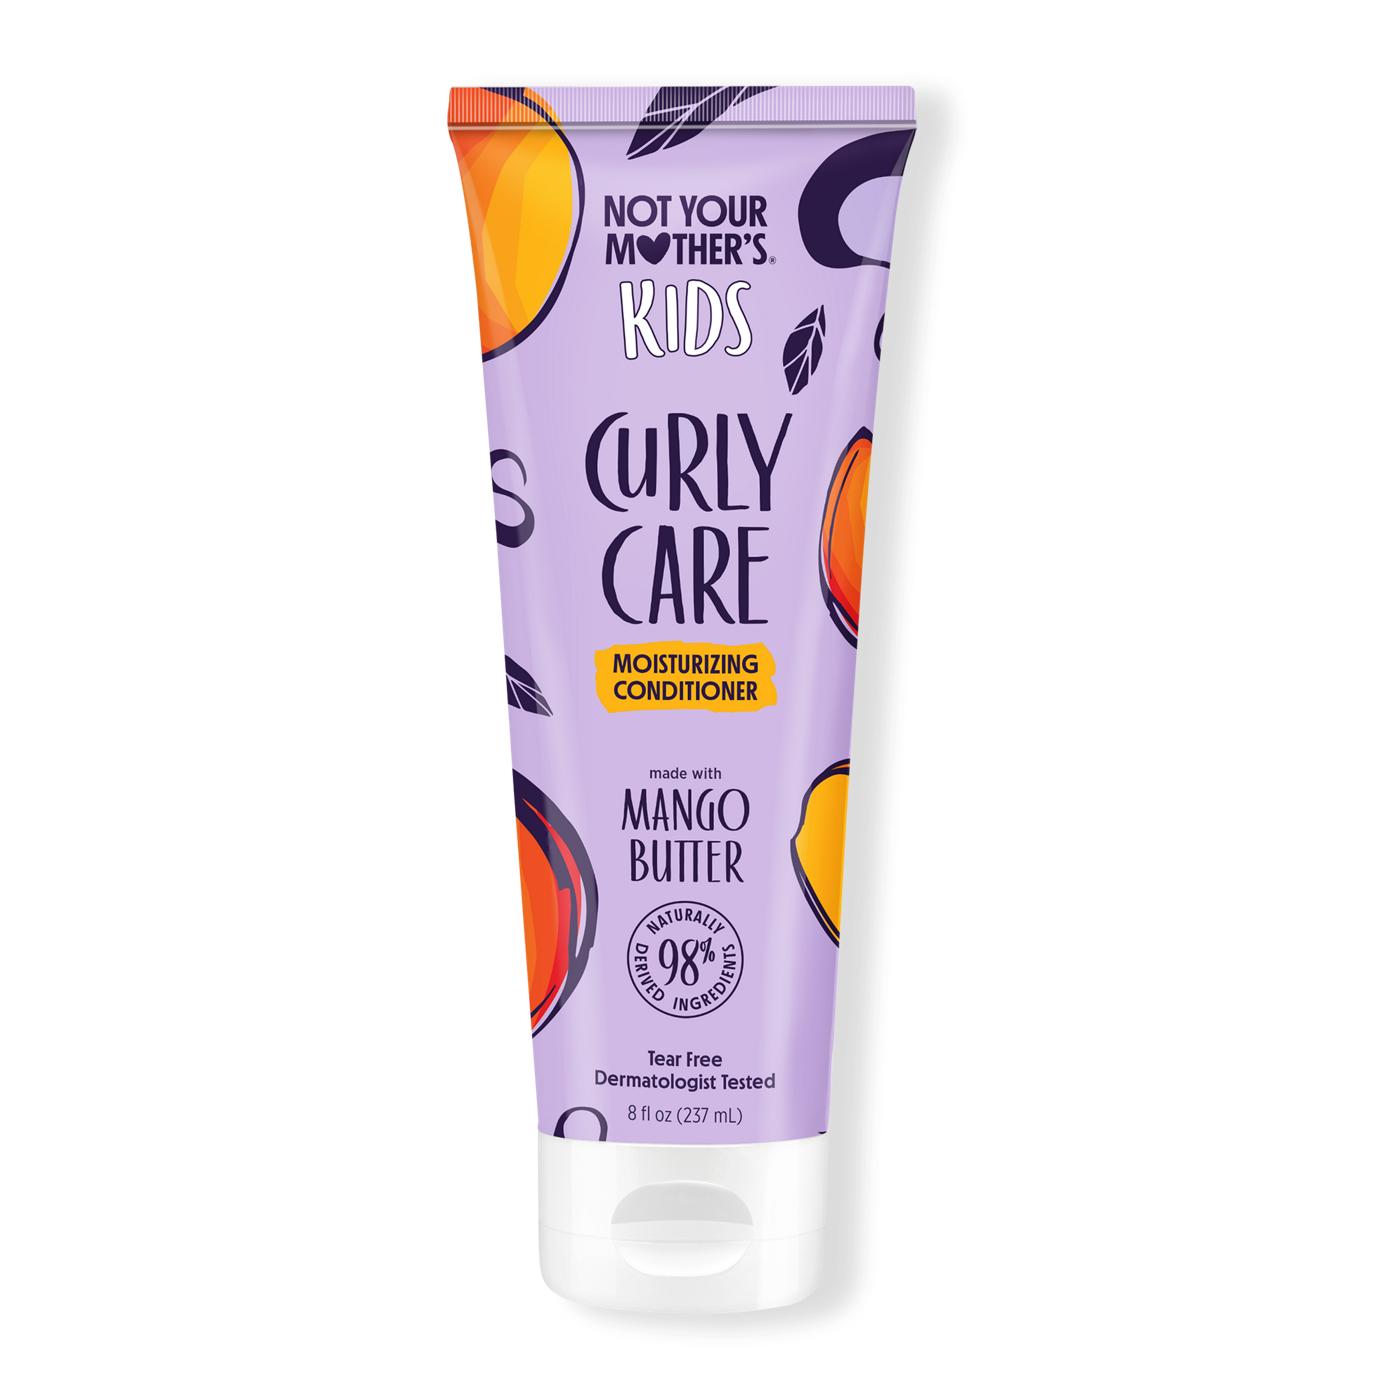 Not Your Mother's Kids Curly Care Moisturizing Conditioner; image 1 of 2